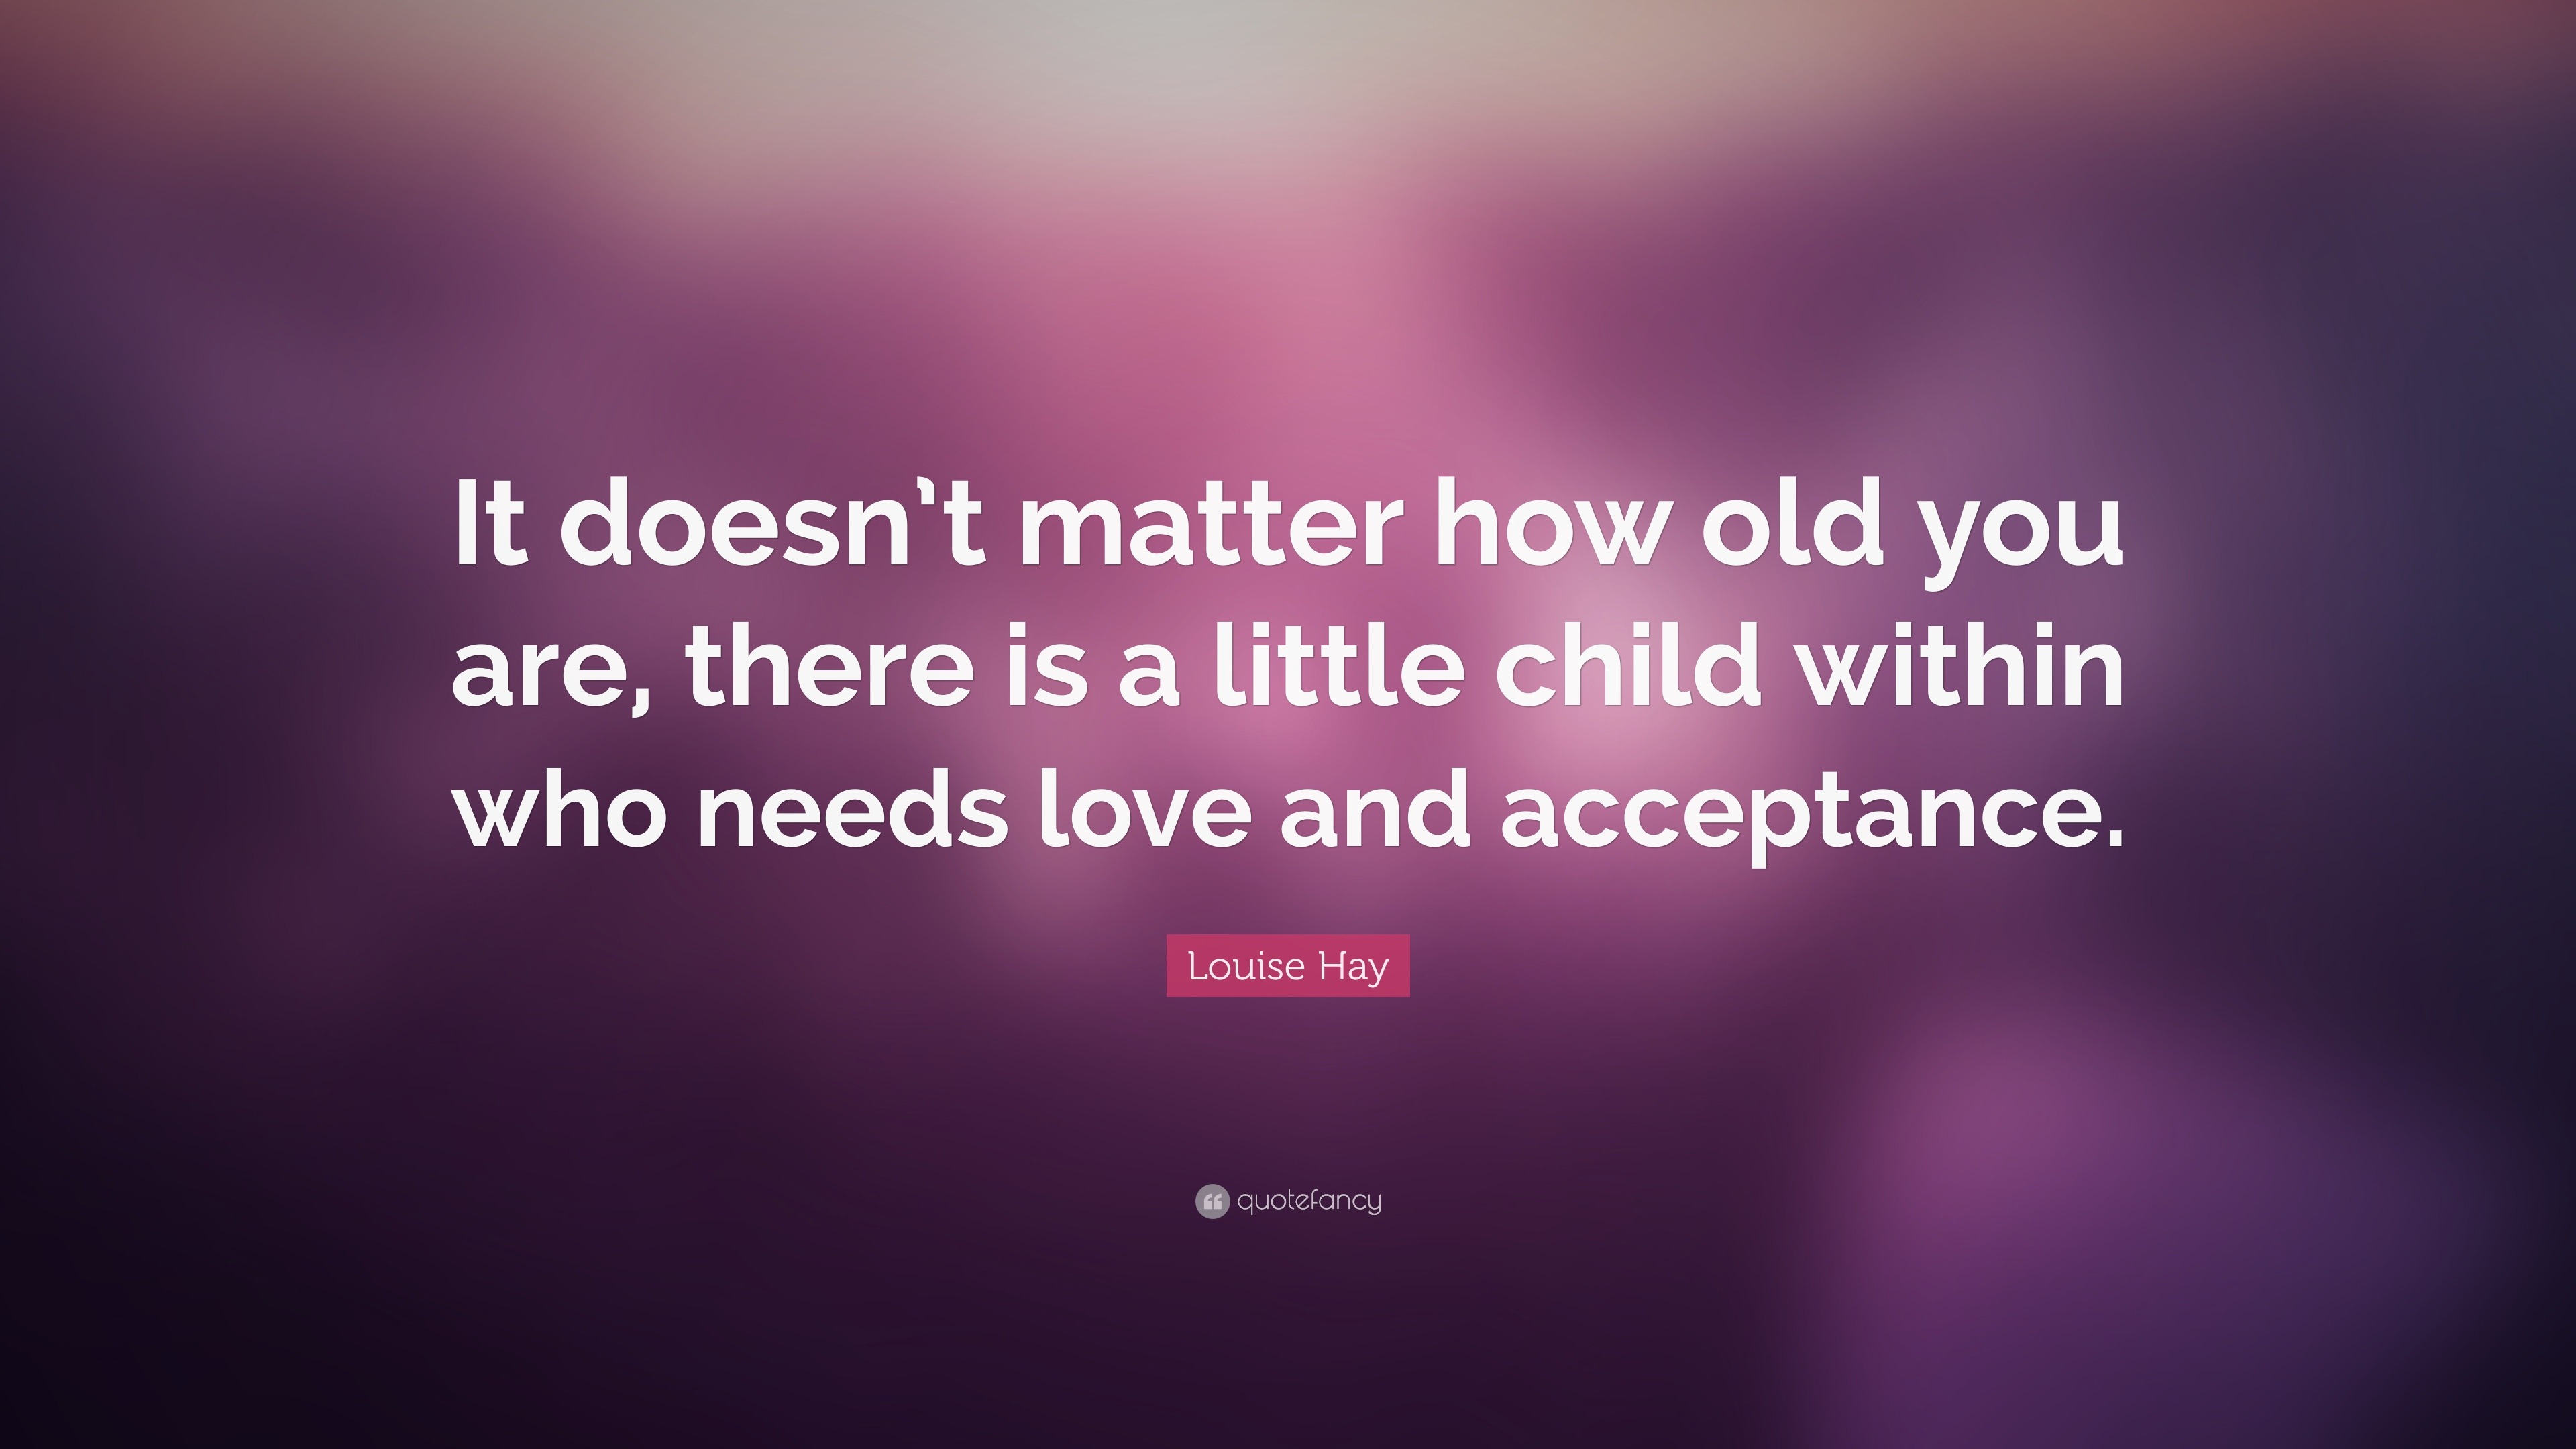 Louise Hay Quote: “It doesn’t matter how old you are, there is a little child ...3840 x 2160